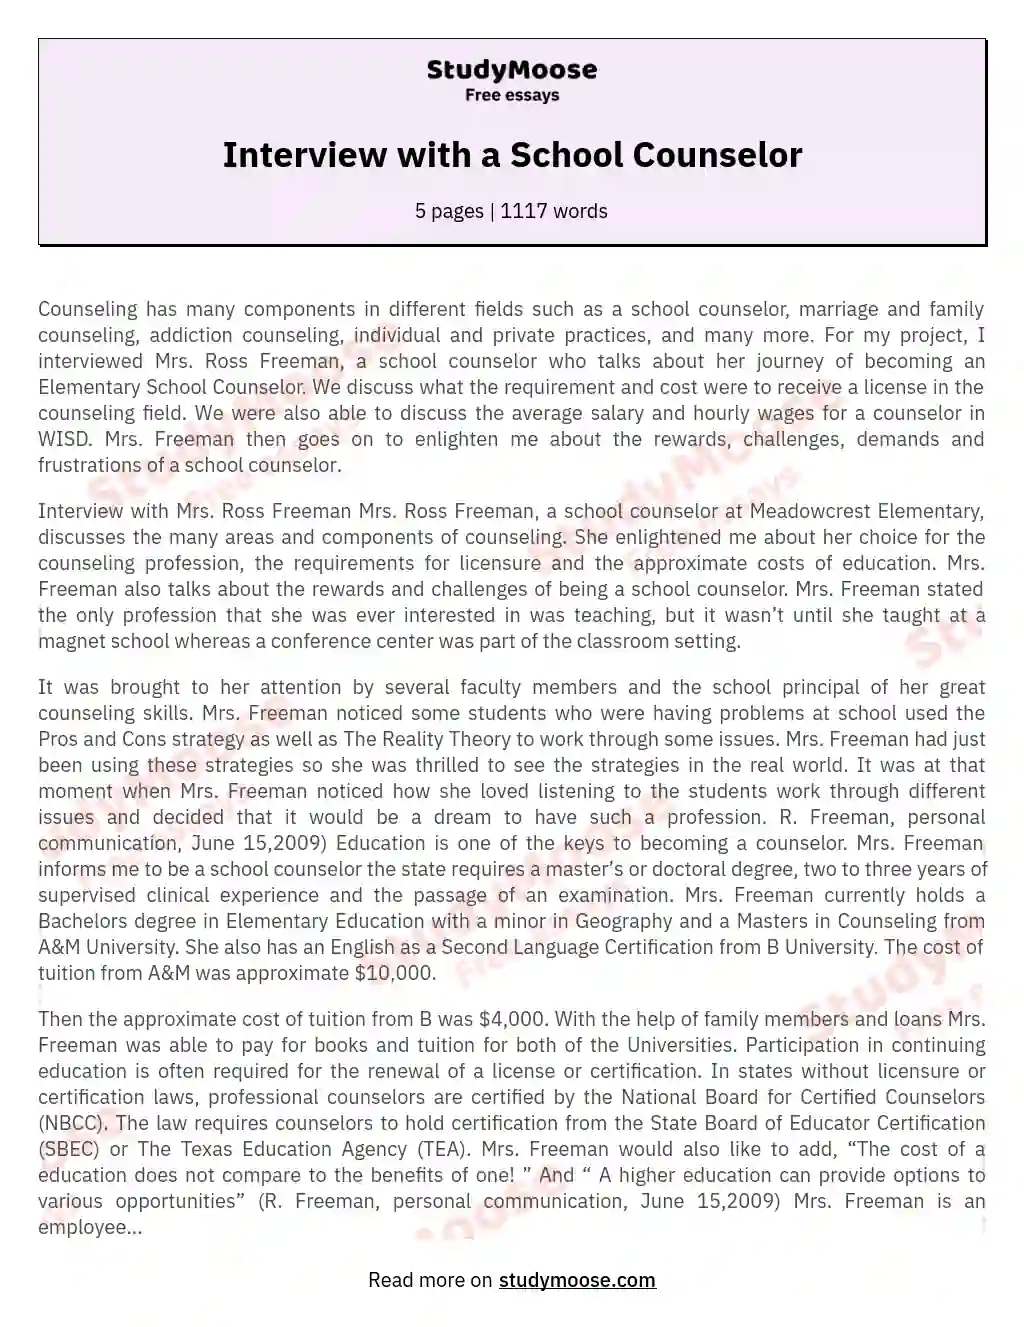 Interview with a School Counselor essay